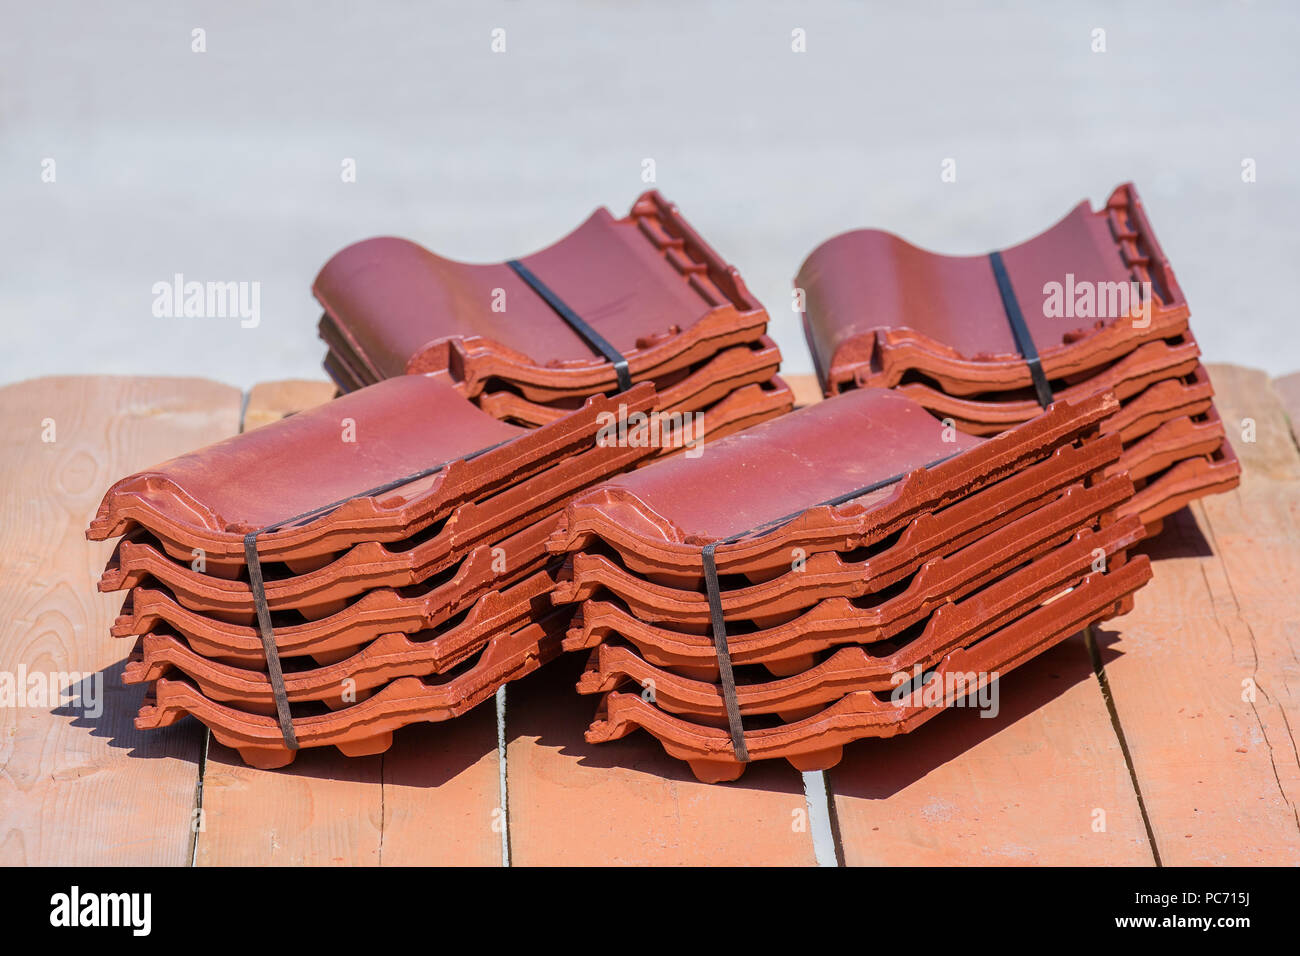 Stacks of new roof tiles lie on wooden scaffold boards Stock Photo